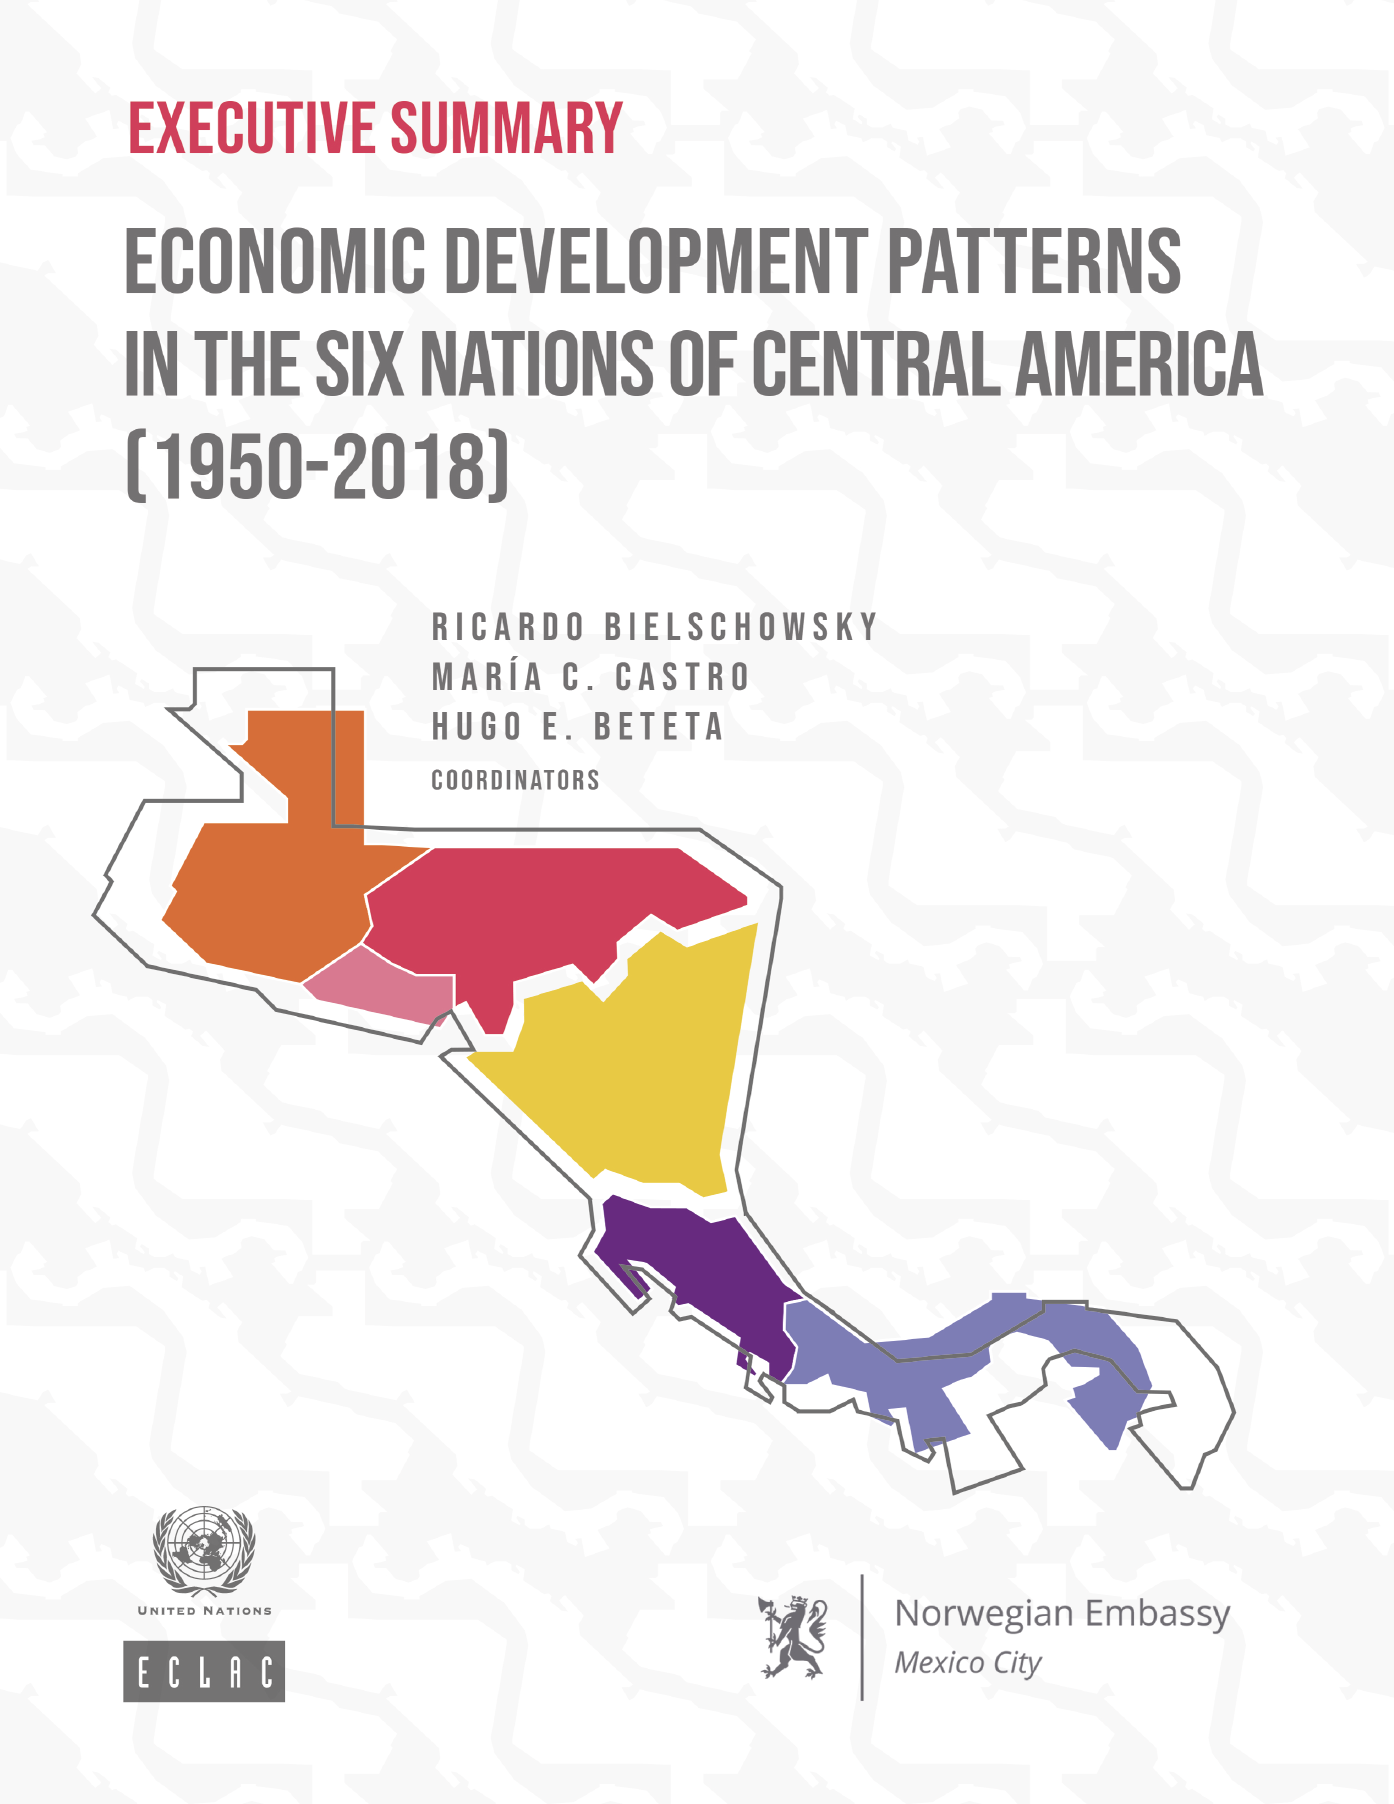 Economic development patterns in the six nations of Central America (1950–2018): Executive summary